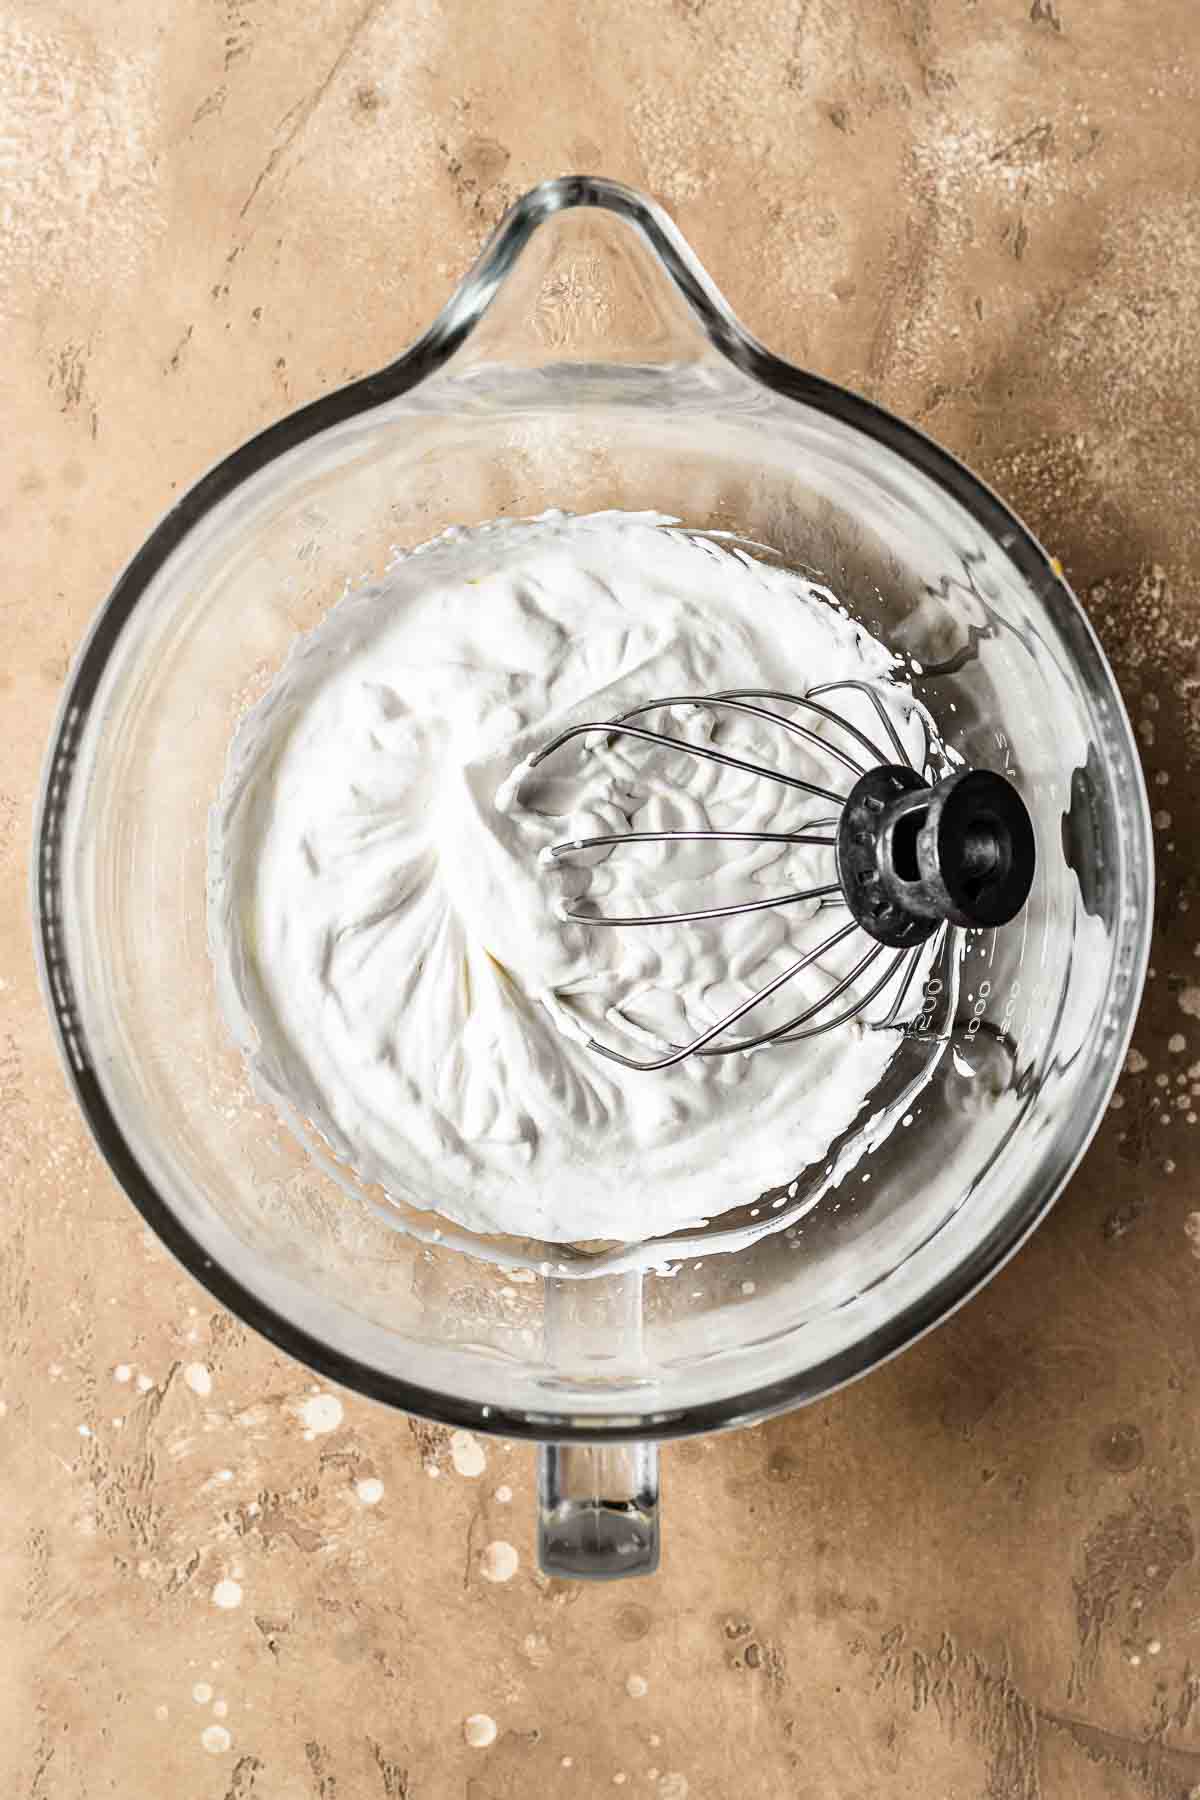 Medium firm peaks of whipped cream in a glass mixing bowl.